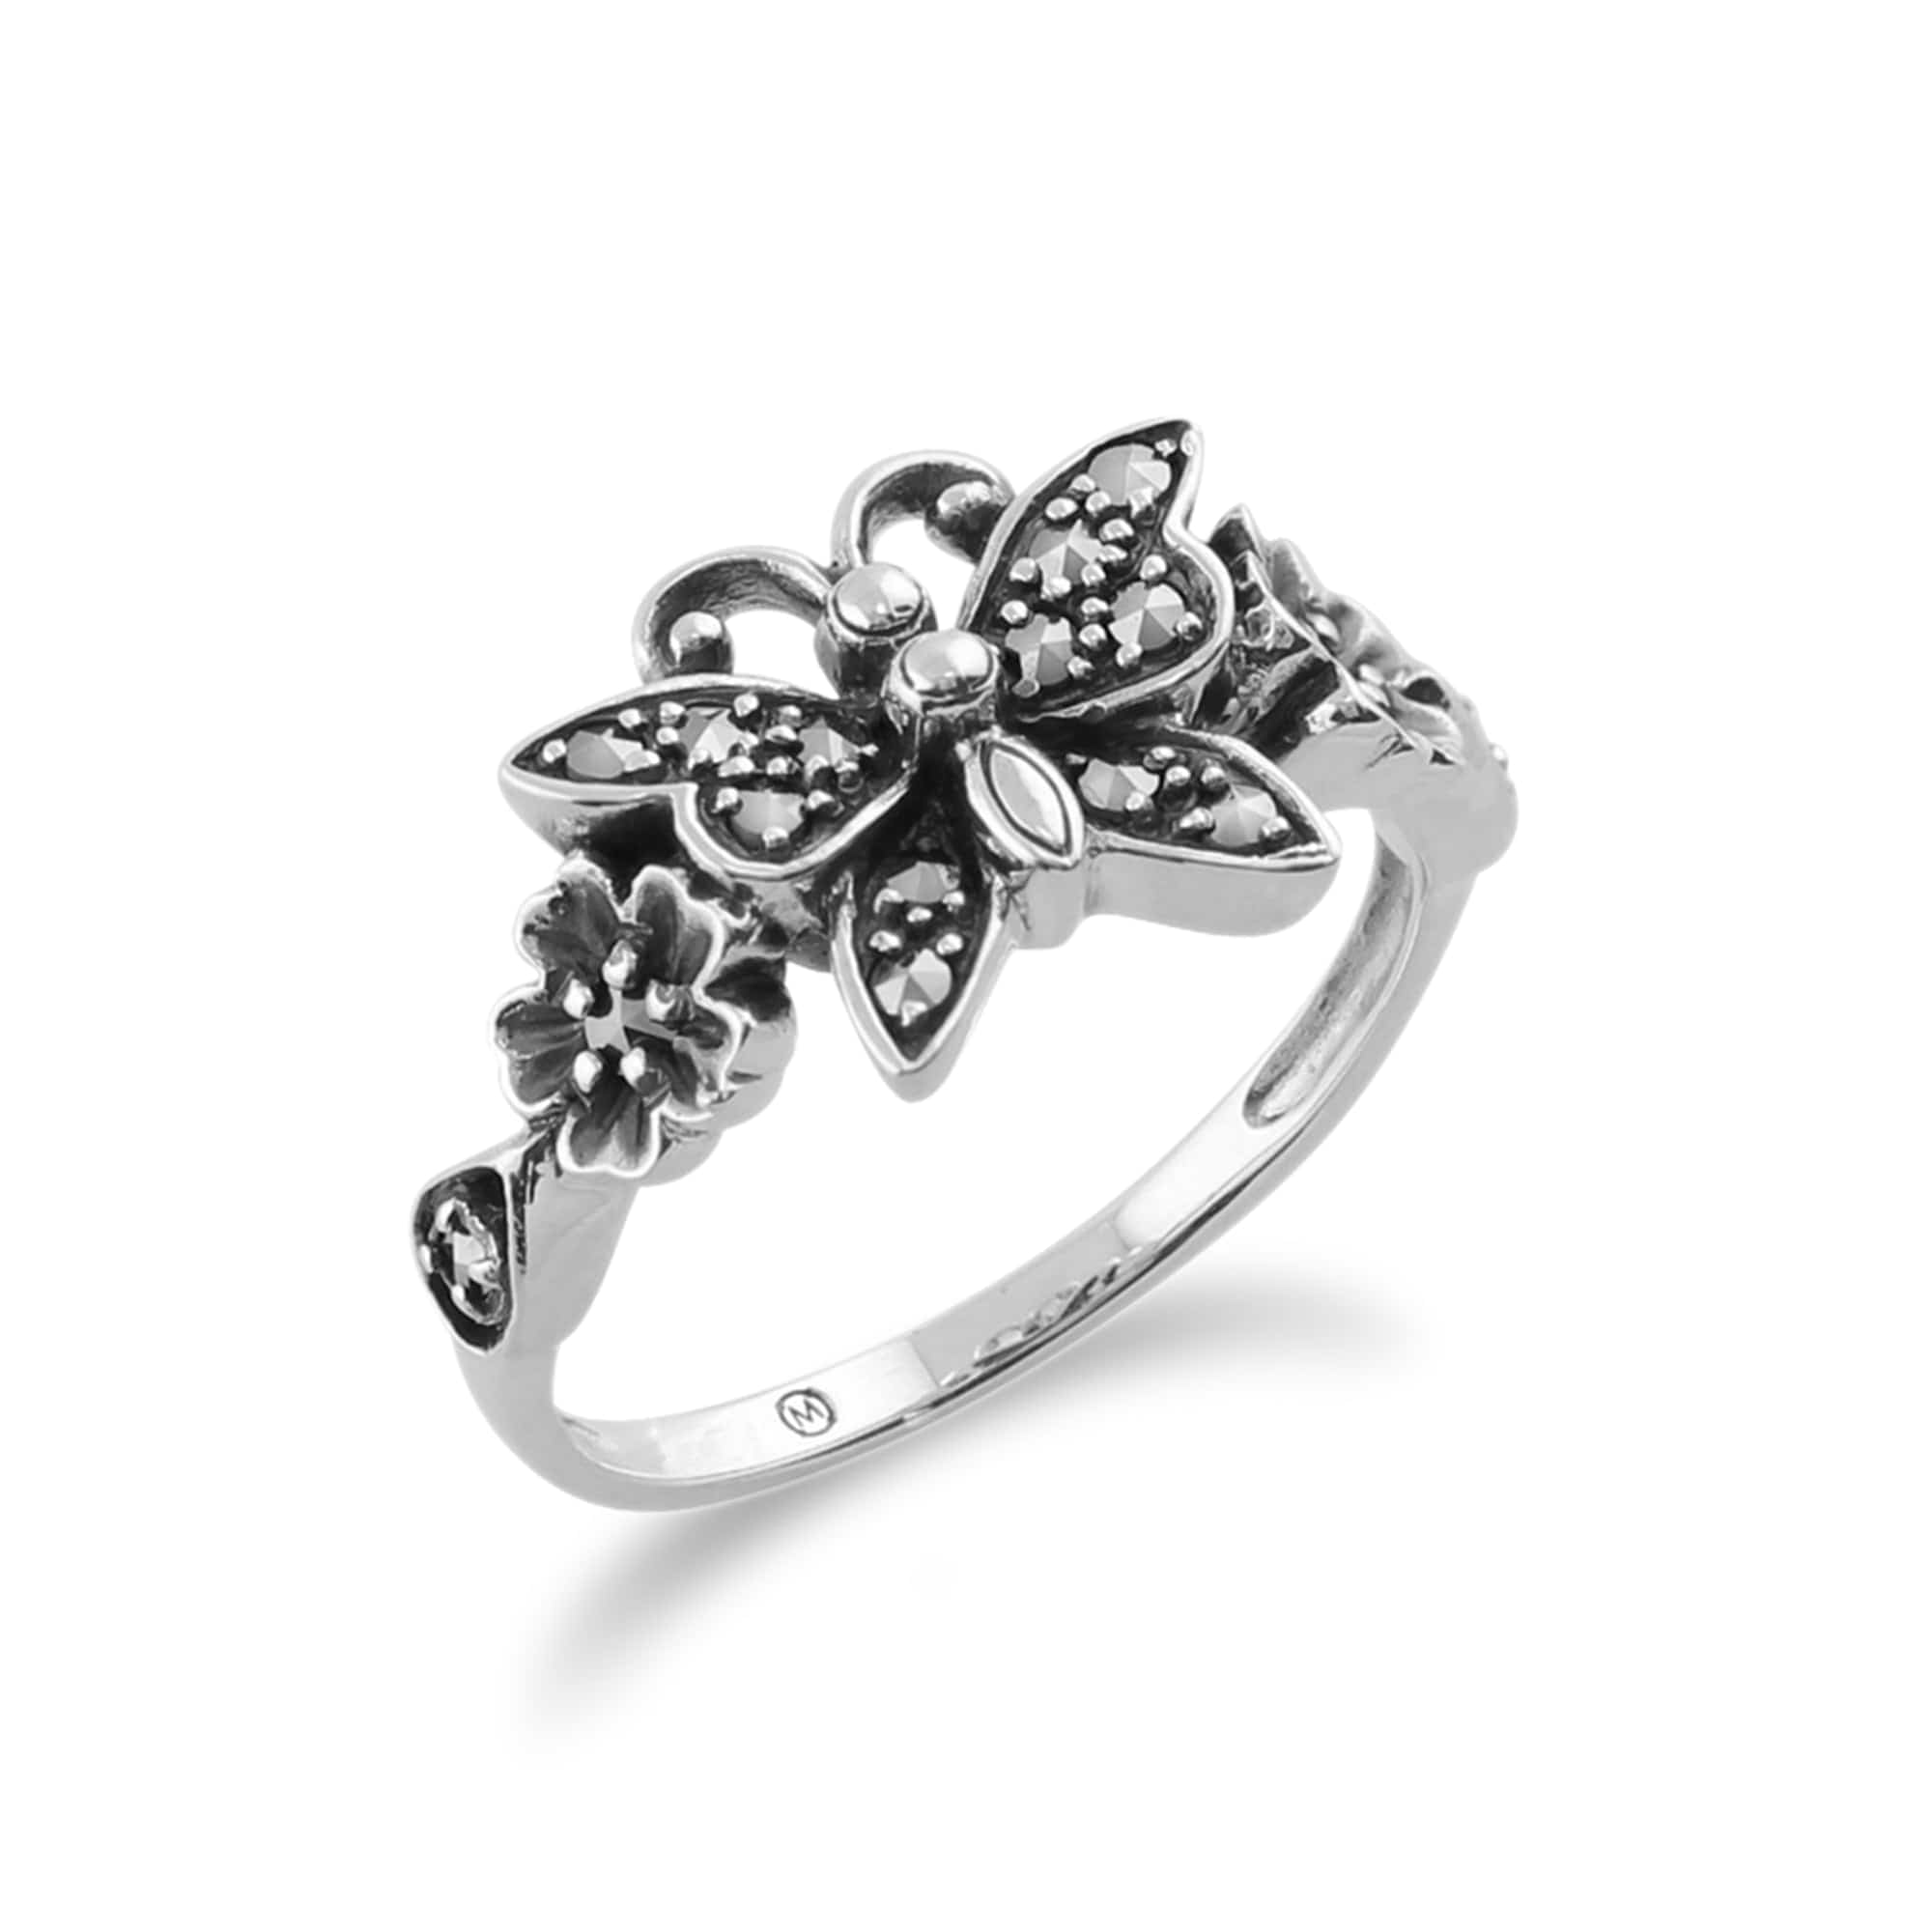 214R441801925 Art Nouveau Style Round Marcasite Butterfly Ring in 925 Sterling Silver 2